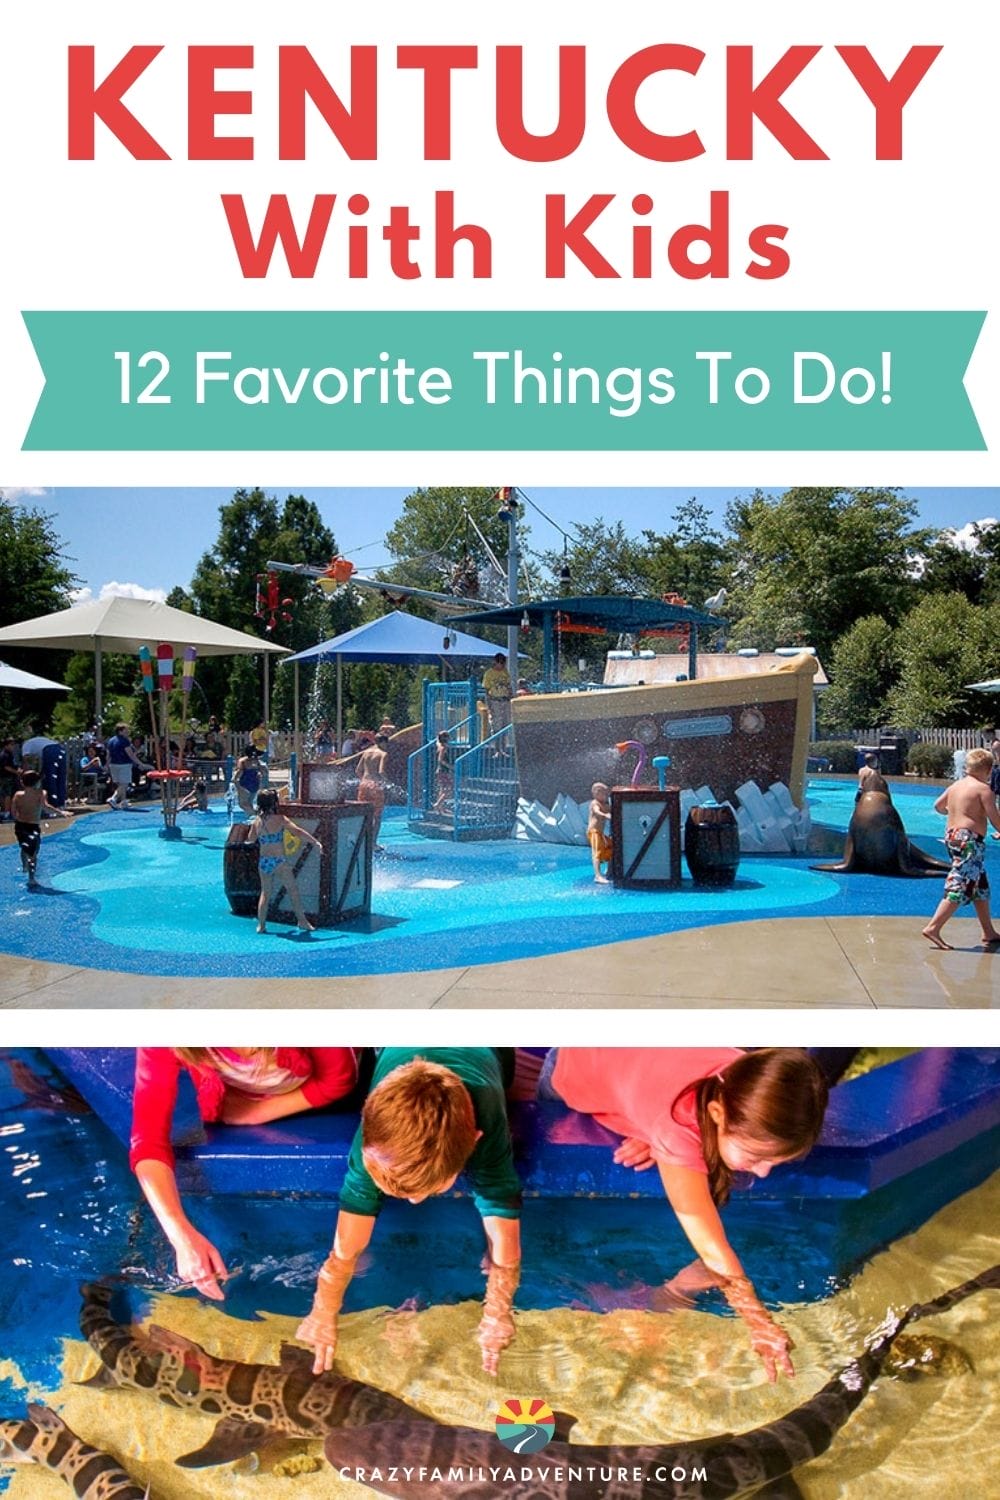 There are many exciting attractions and things to do in Kentucky with kids. Our top 11 list of attractions will entertain the whole family!